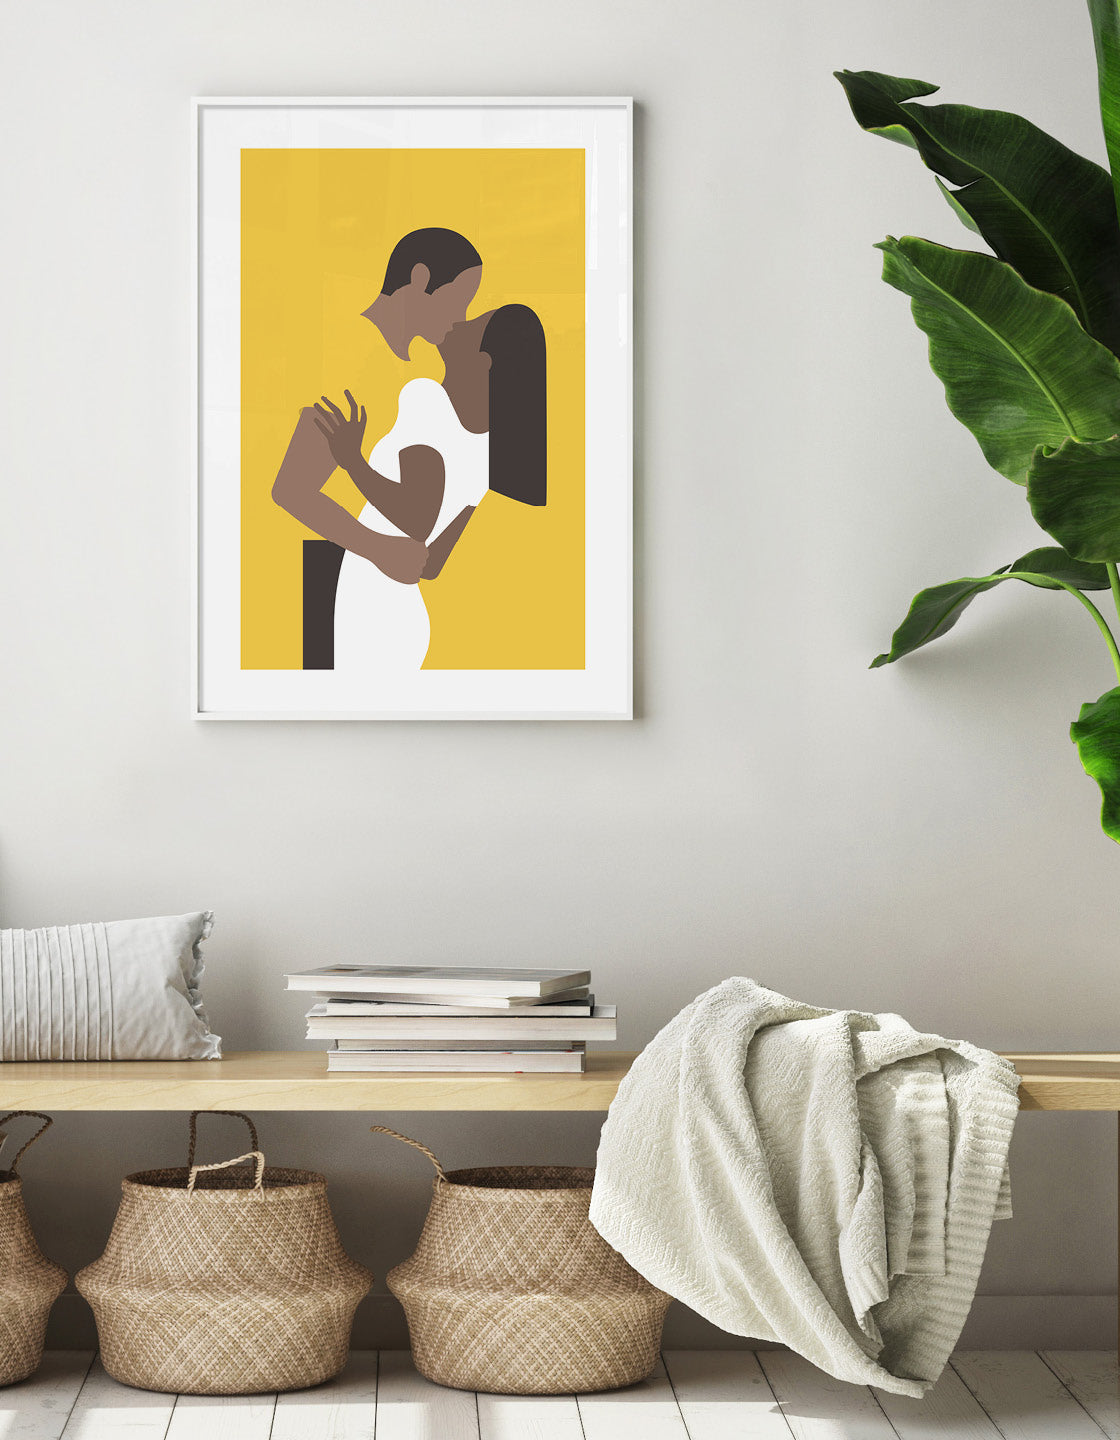 Yellow poster print depicts a couple in an embrace kissing. The woman is on the right wearing a white dress and the man's yellow t-shirt blends with the background